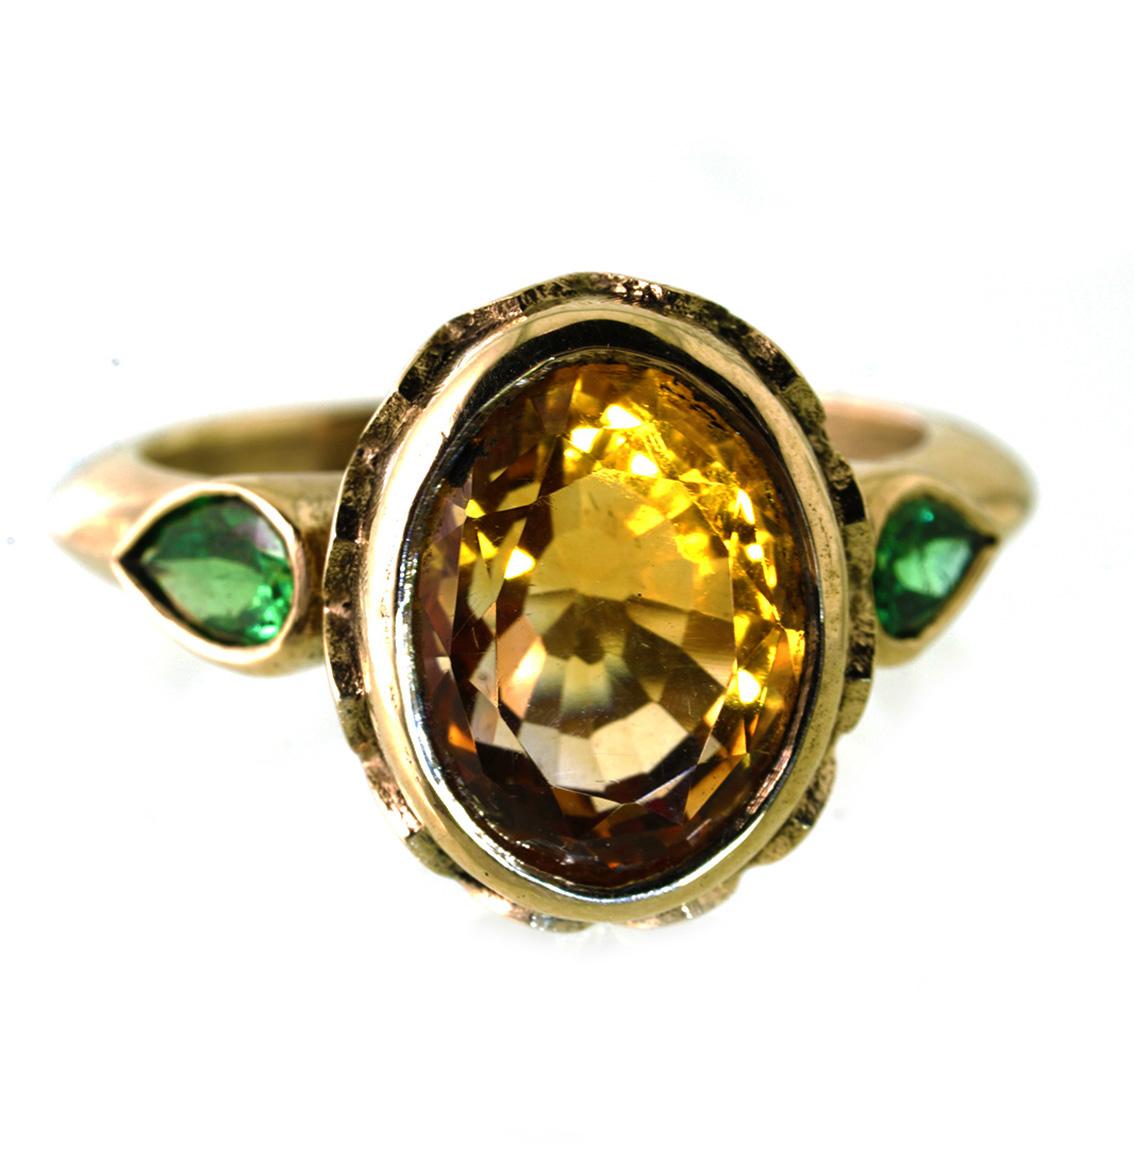 Garden of the Hesperides Ring in 9 Karat Yellow Gold, Citrine and Green Garnets 2